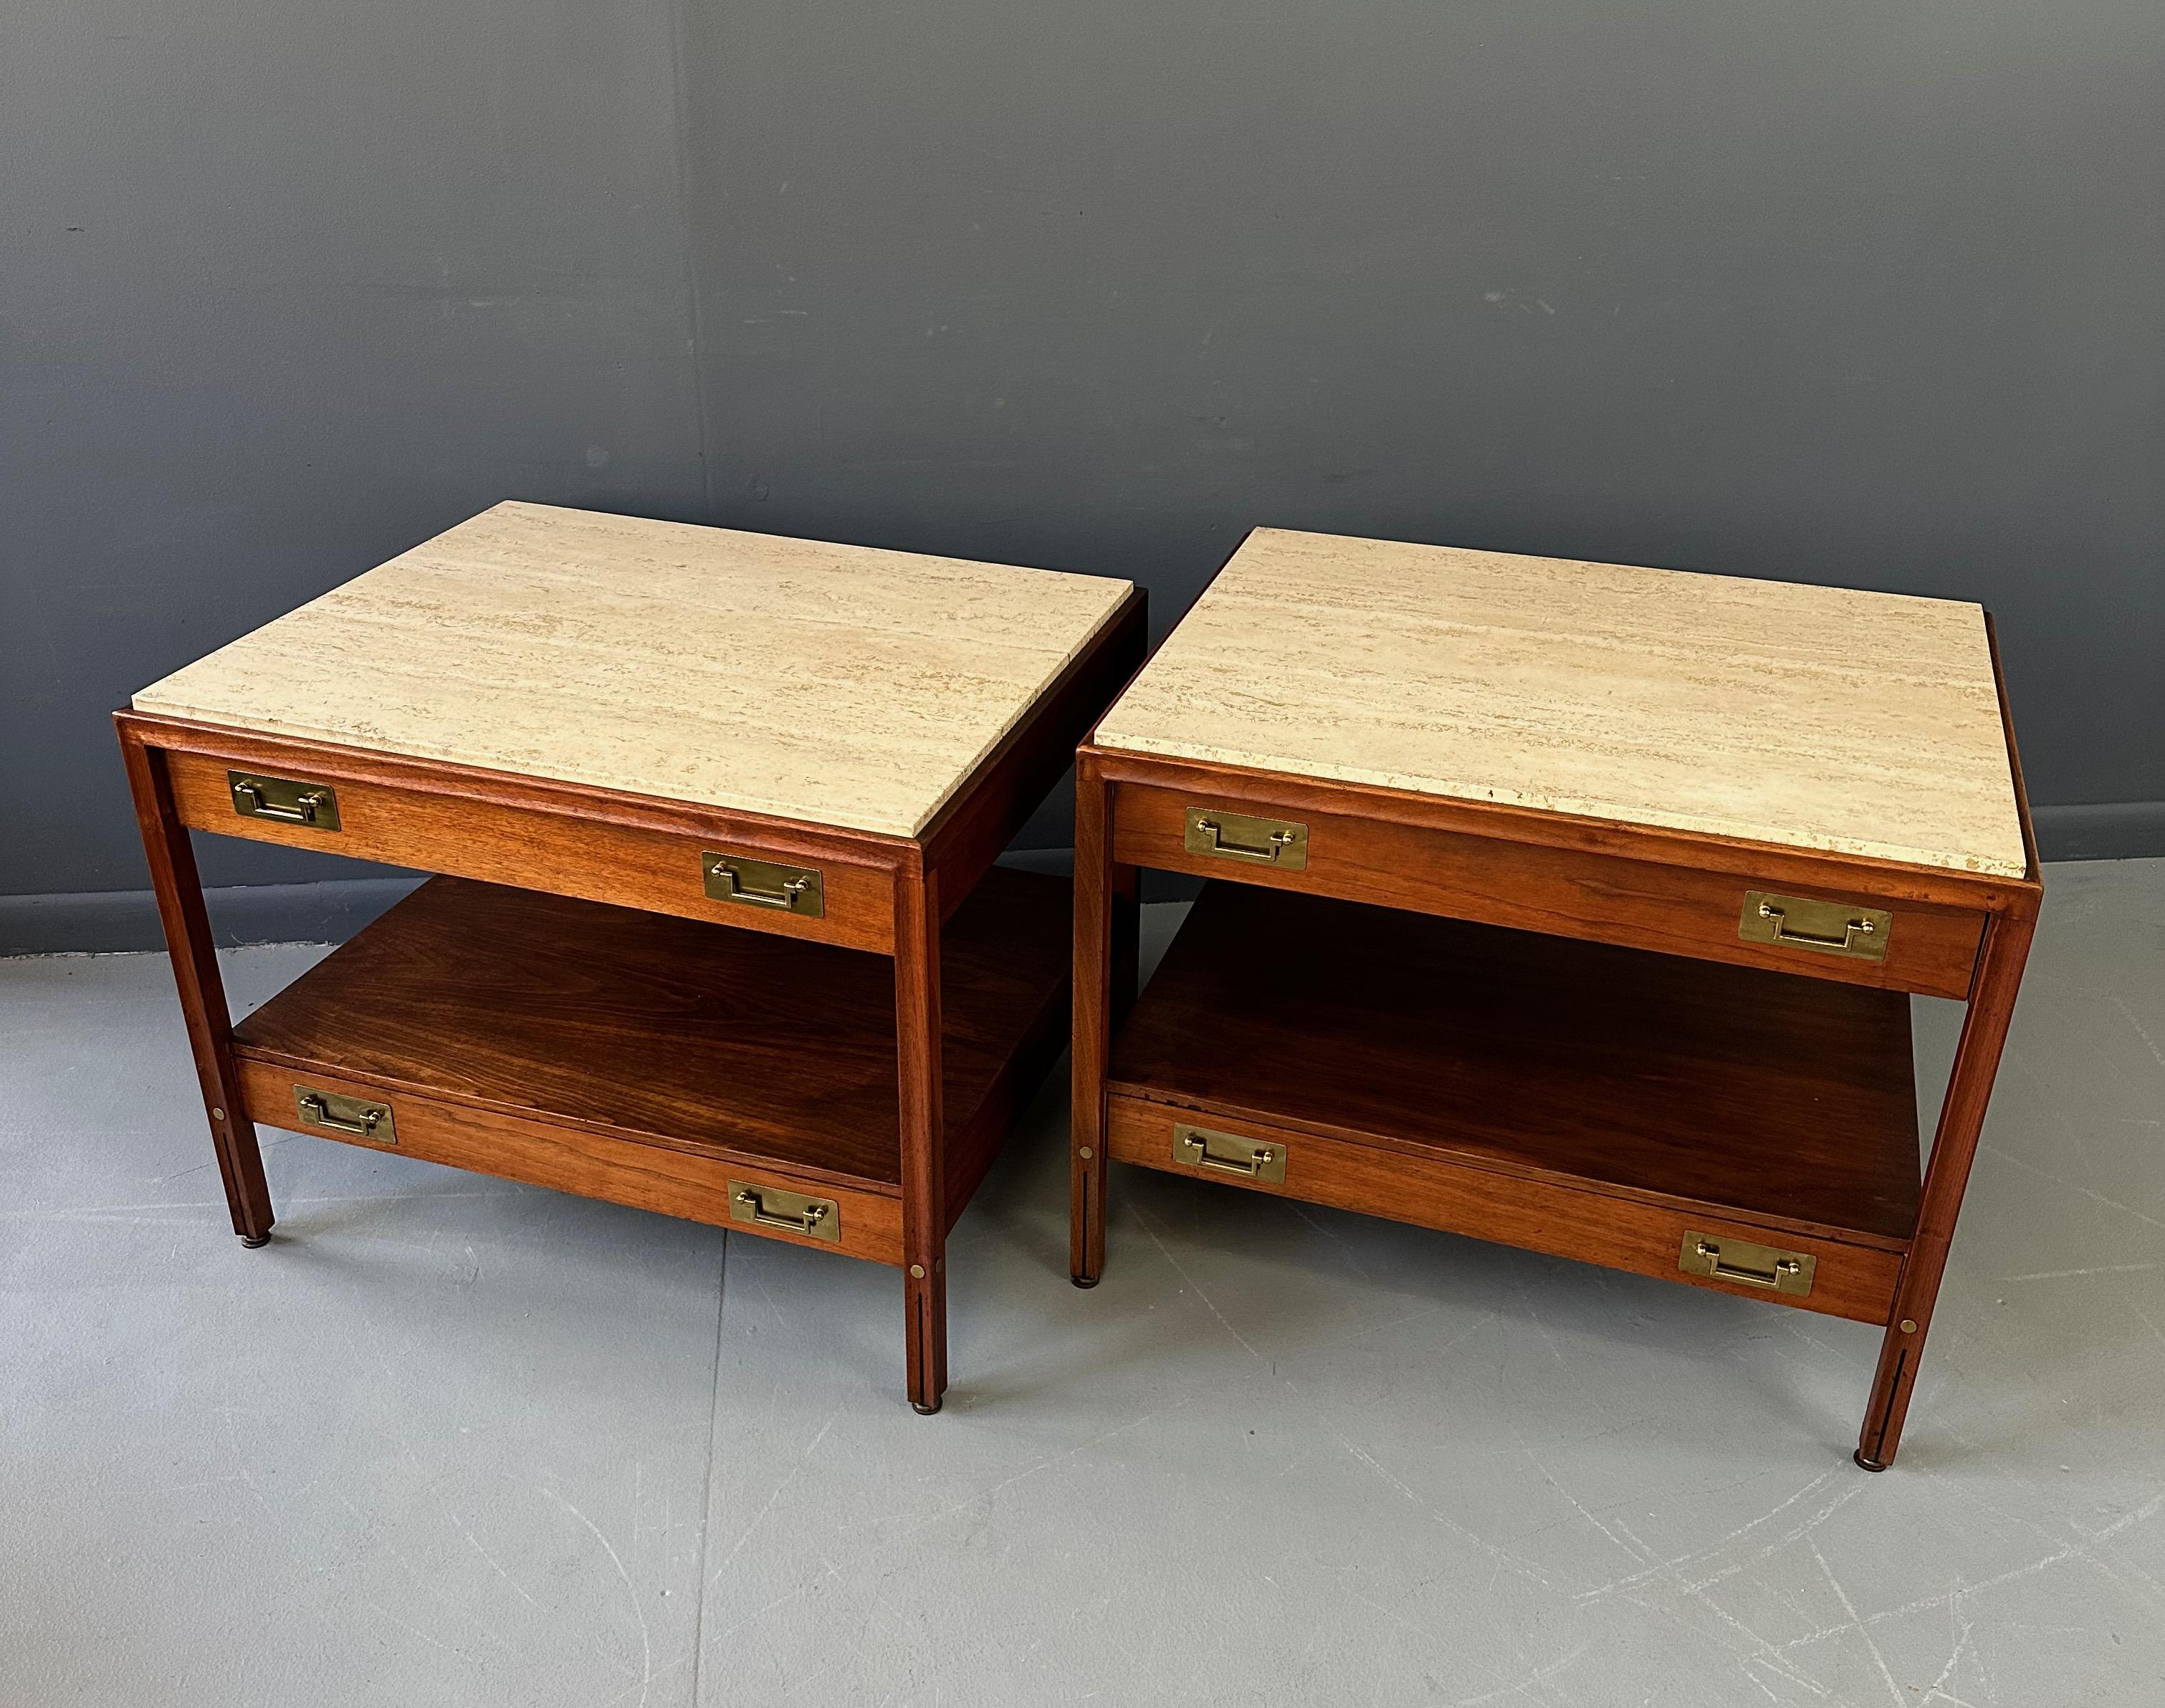 20th Century Pair of Walnut and Travertine Nightstands with Brass Accents and Rosewood Trim For Sale